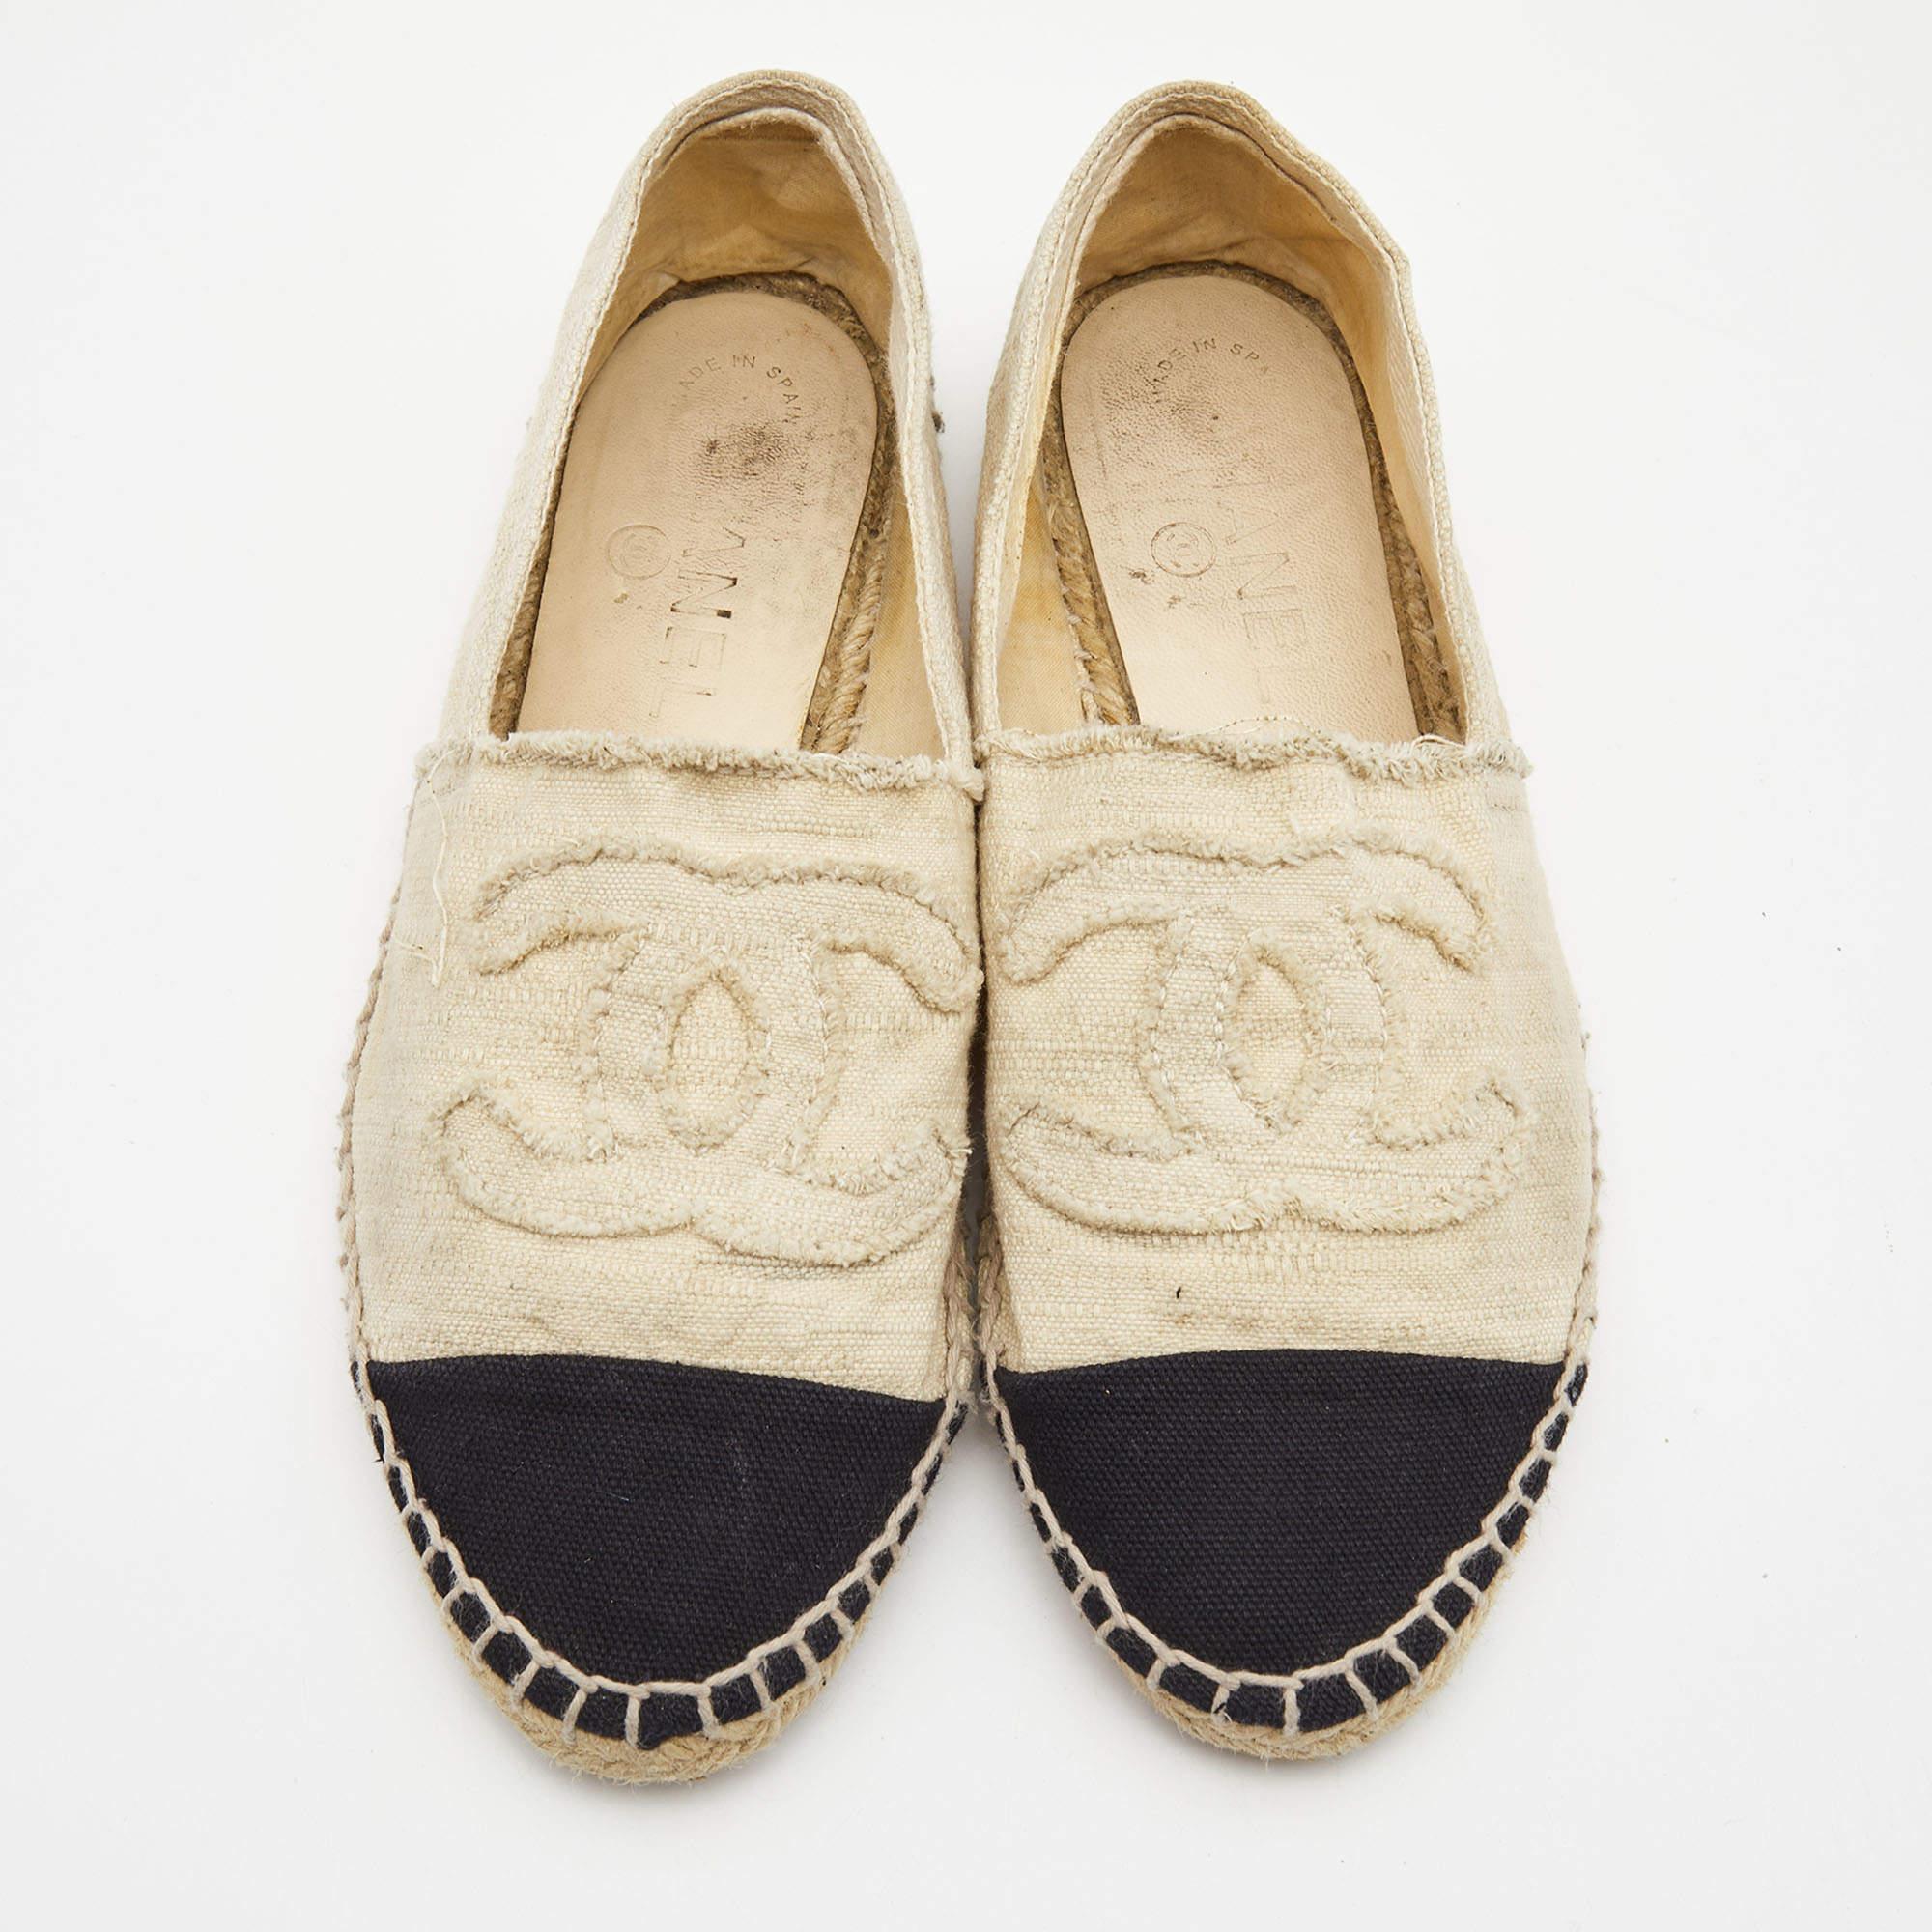 These Chanel espadrille flats have got you covered for all-day plans. They come in a versatile design, and they look great on the feet.

Includes: Original Dustbag

